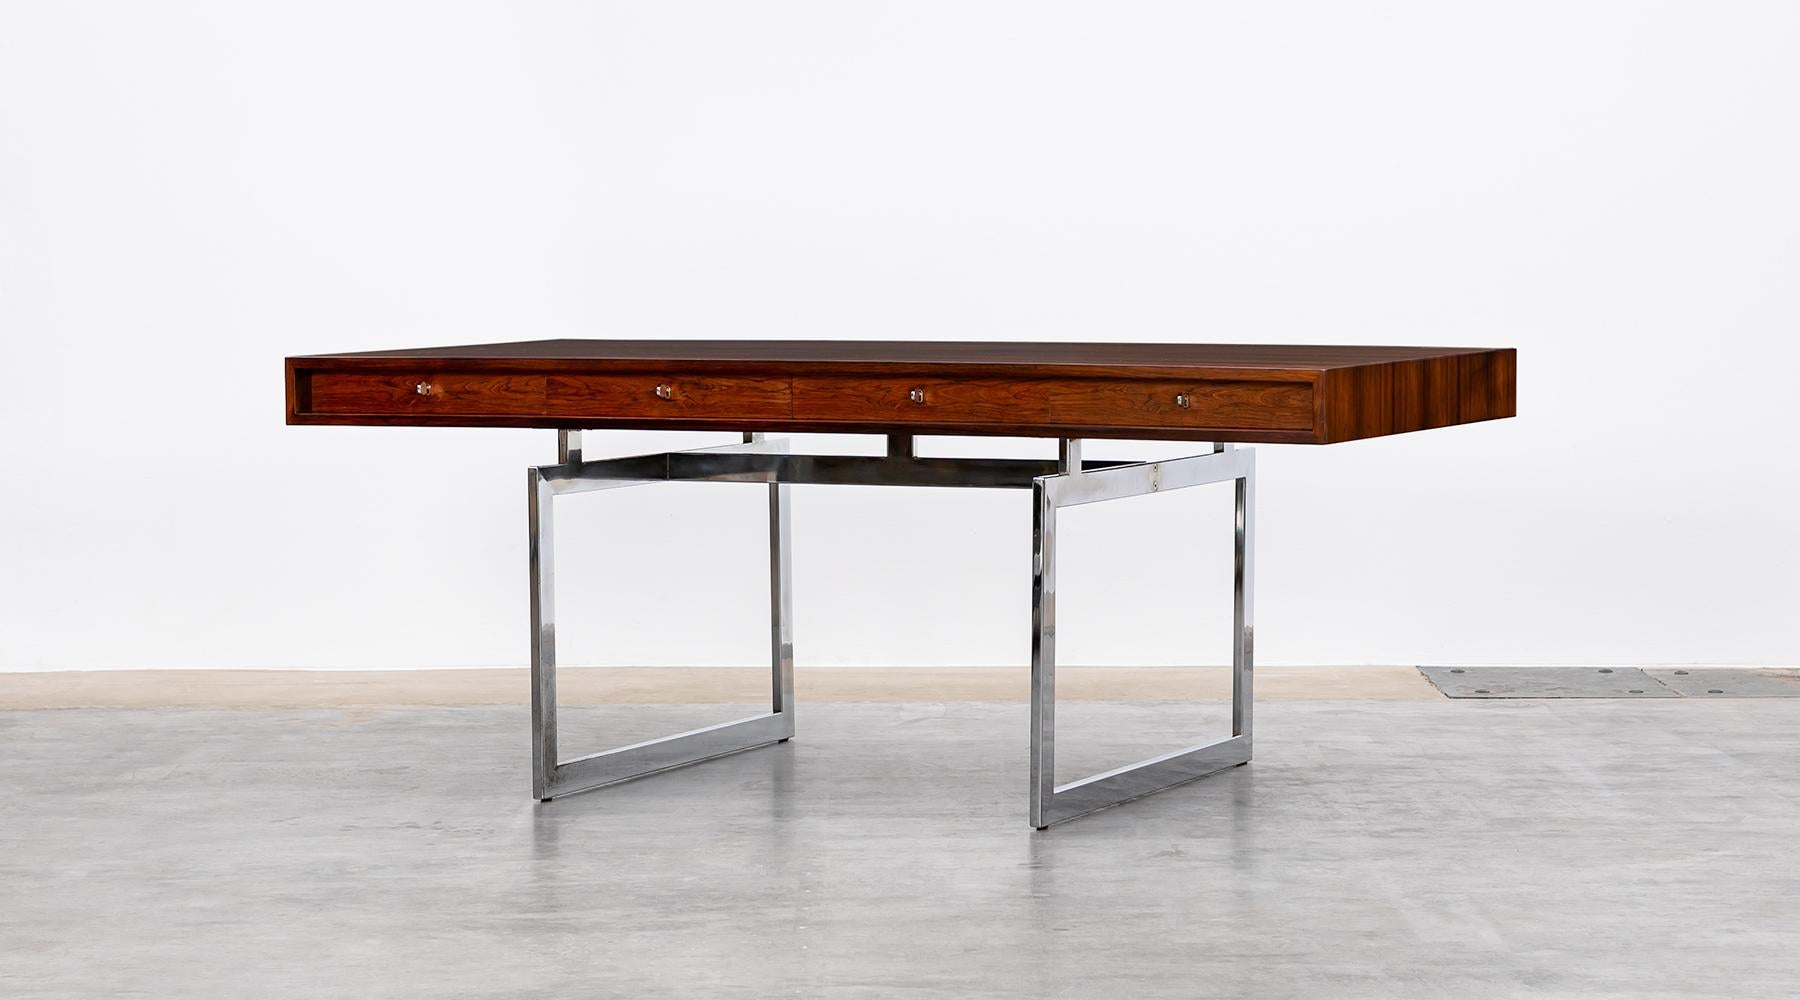 Bodil Kjaer, rosewood veneer, office system, Denmark 1959.

Fantastic desk with four drawers, which can all be locked stands on a square metal tube base. The wood surface is made of rosewood veneer.? Designed by famous Bodil Kjaer in 1959.